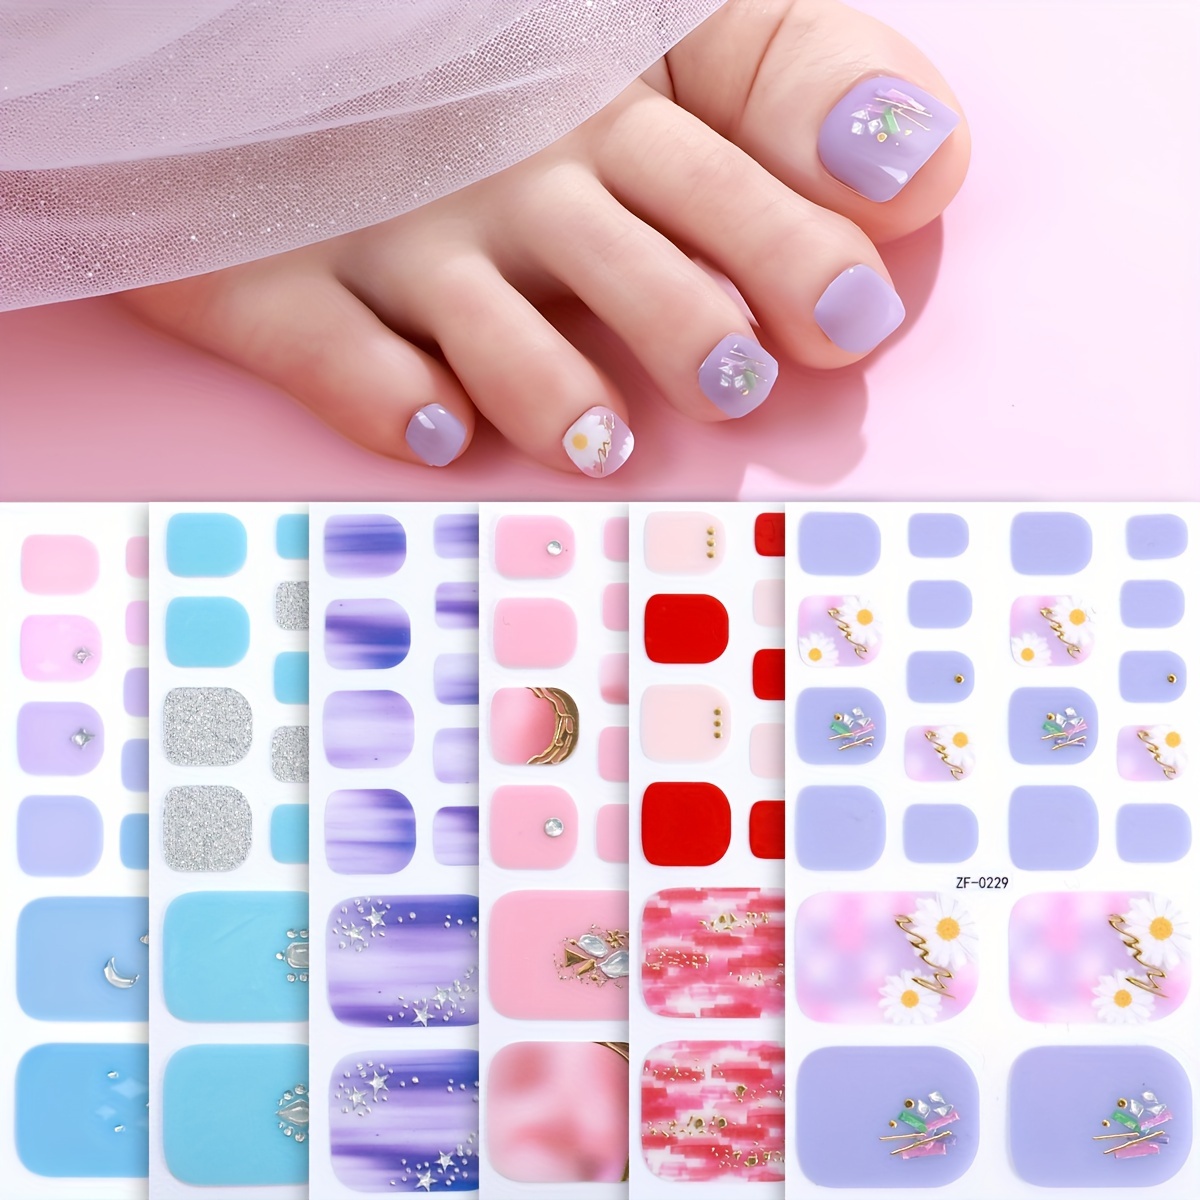 

6-piece Spring Halo Toe Nail Strips - Y2k Inspired, Glitter & Diamond Stars & Moons, Self-adhesive Pedicure Decals With 2 Nail Files For Women And Girls, Easy Diy Manicure Kit